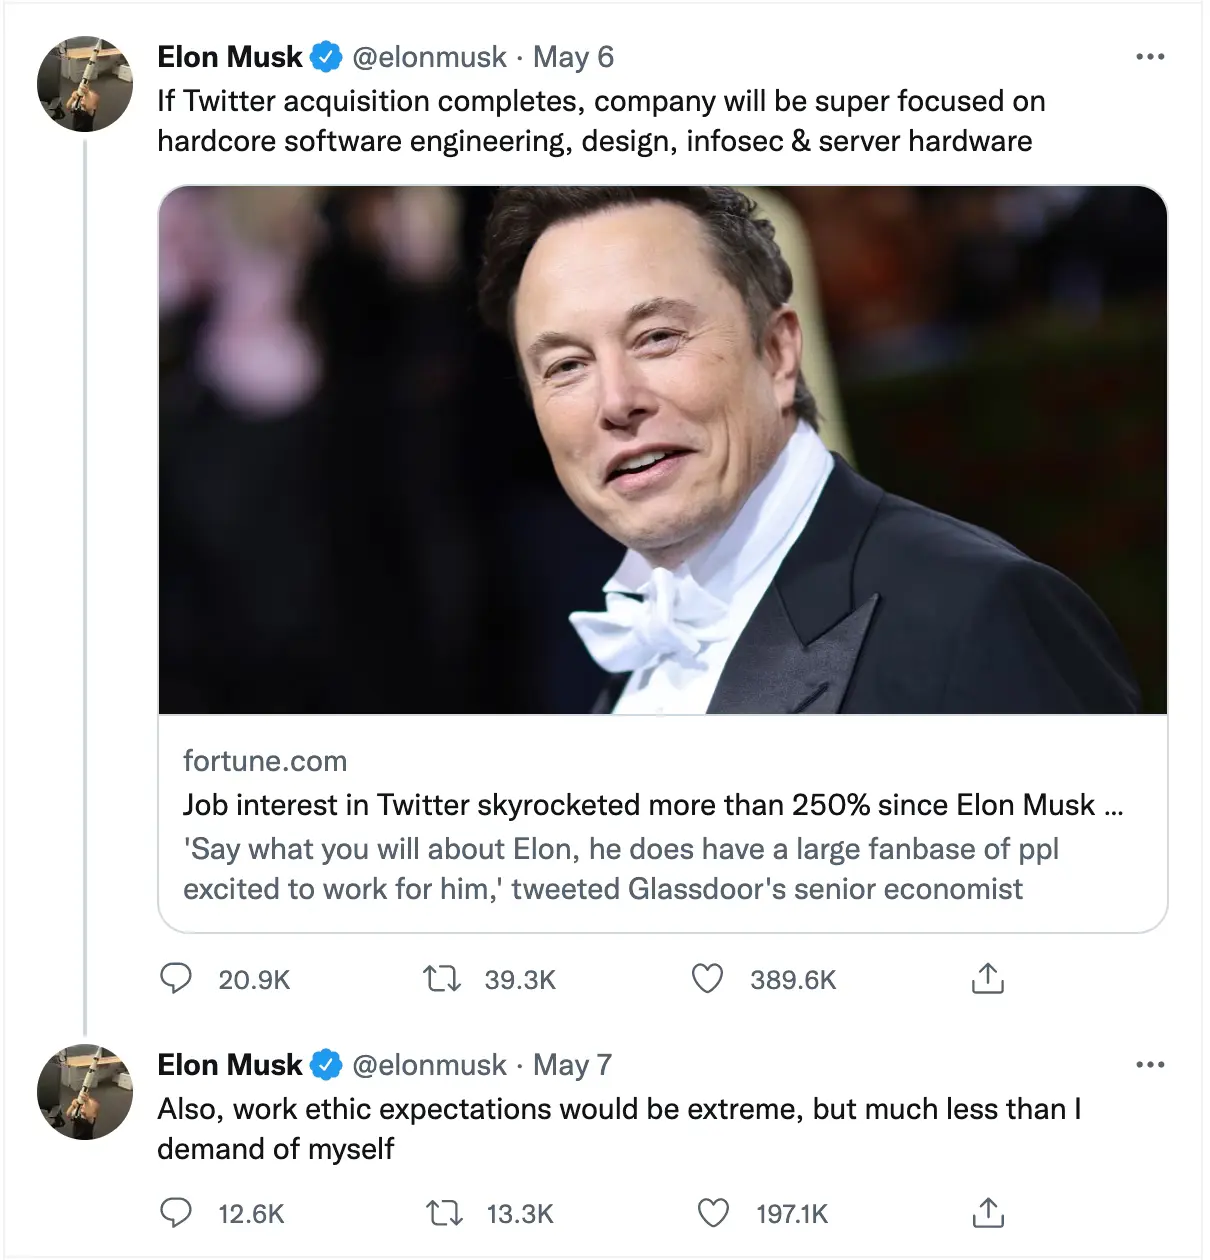 Elon expects increase in work ethics when he takes over Twitter...